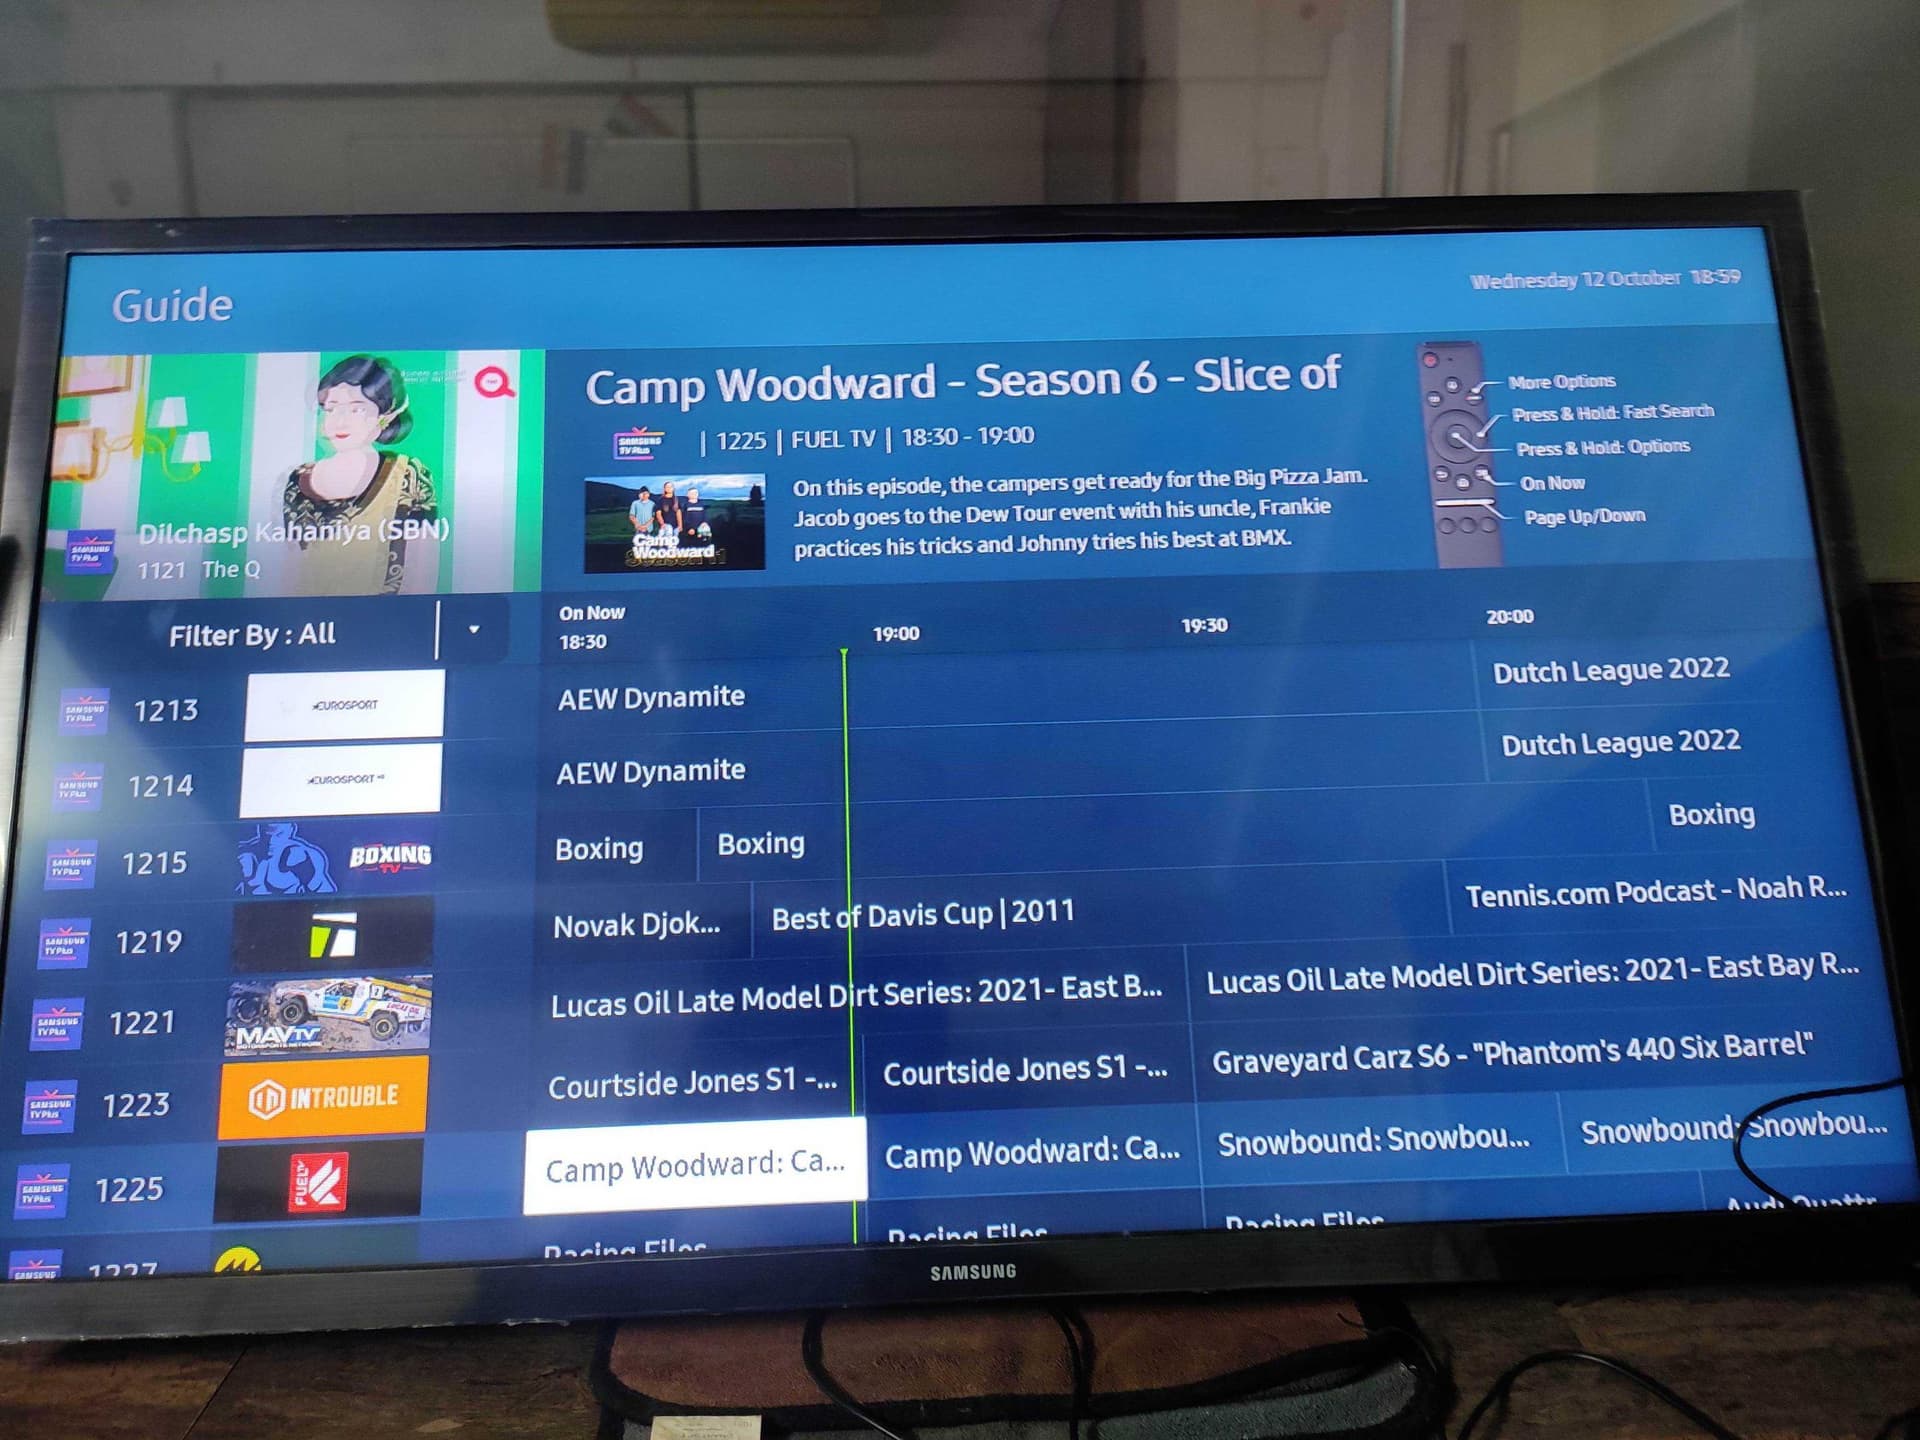 How To Program Guide On Samsung Smart TV